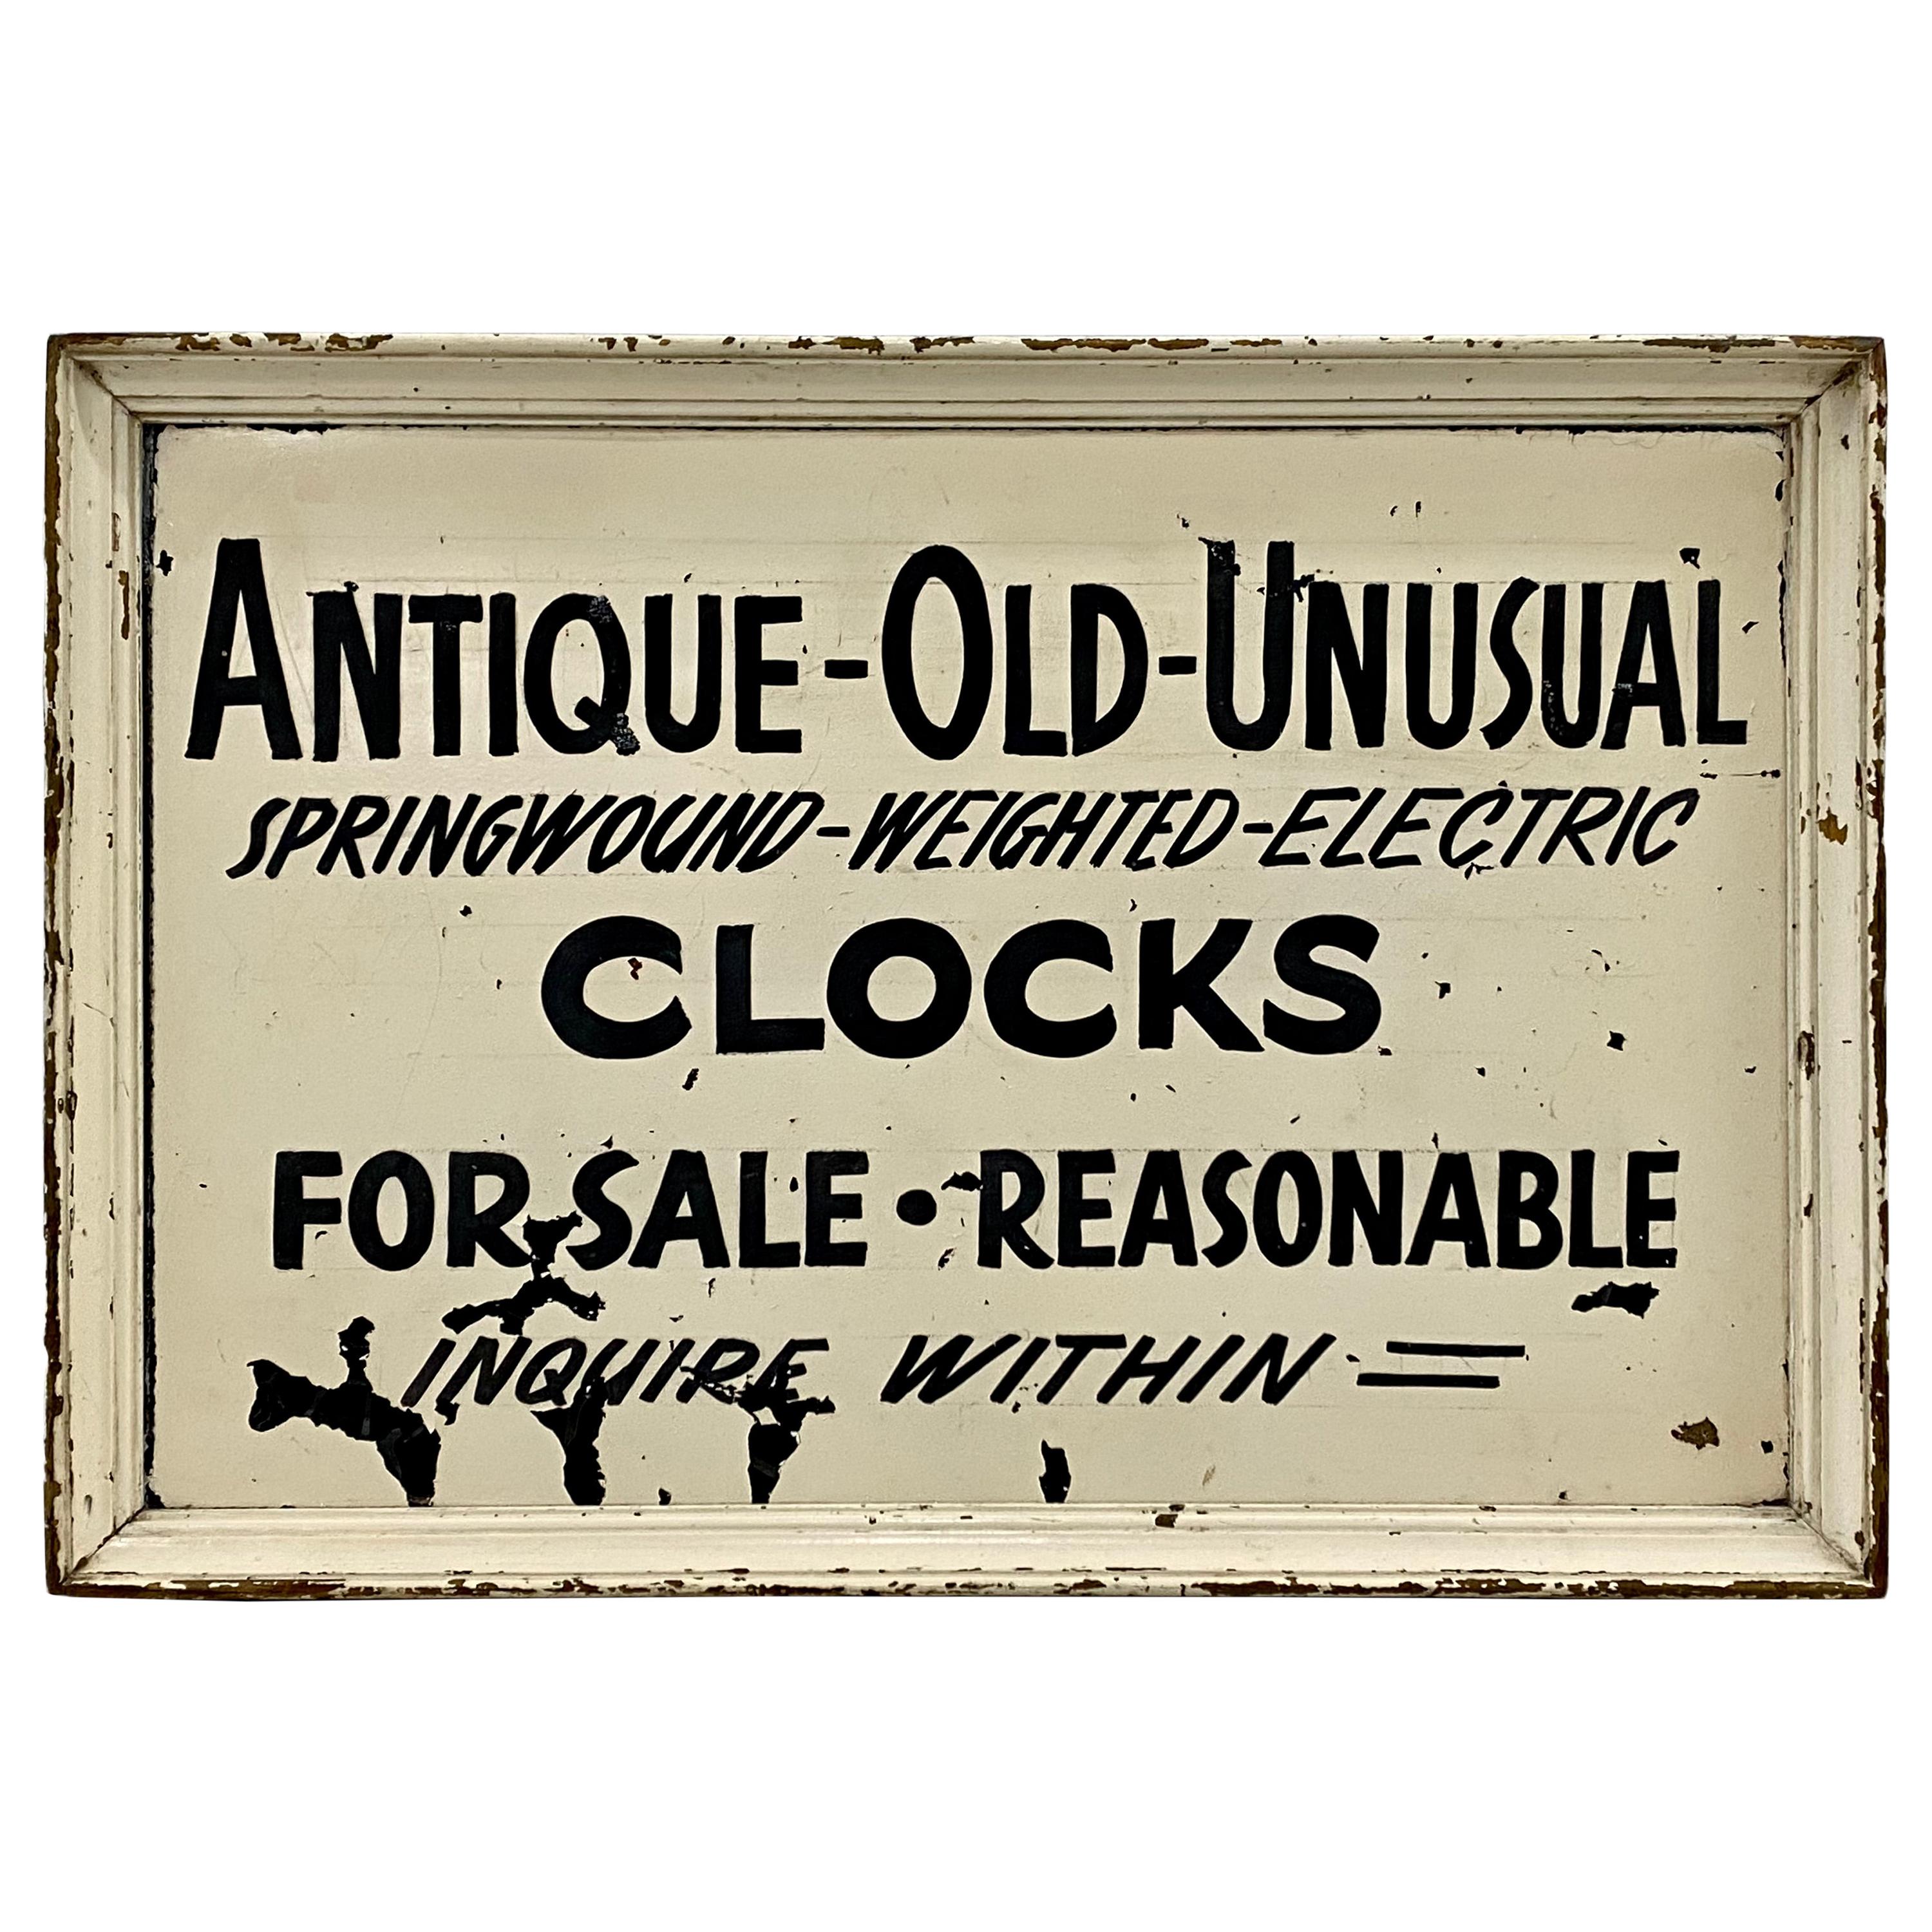 "Antique - Old - Unusual" Clocks for Sale Hand Painted Sign, c.1920